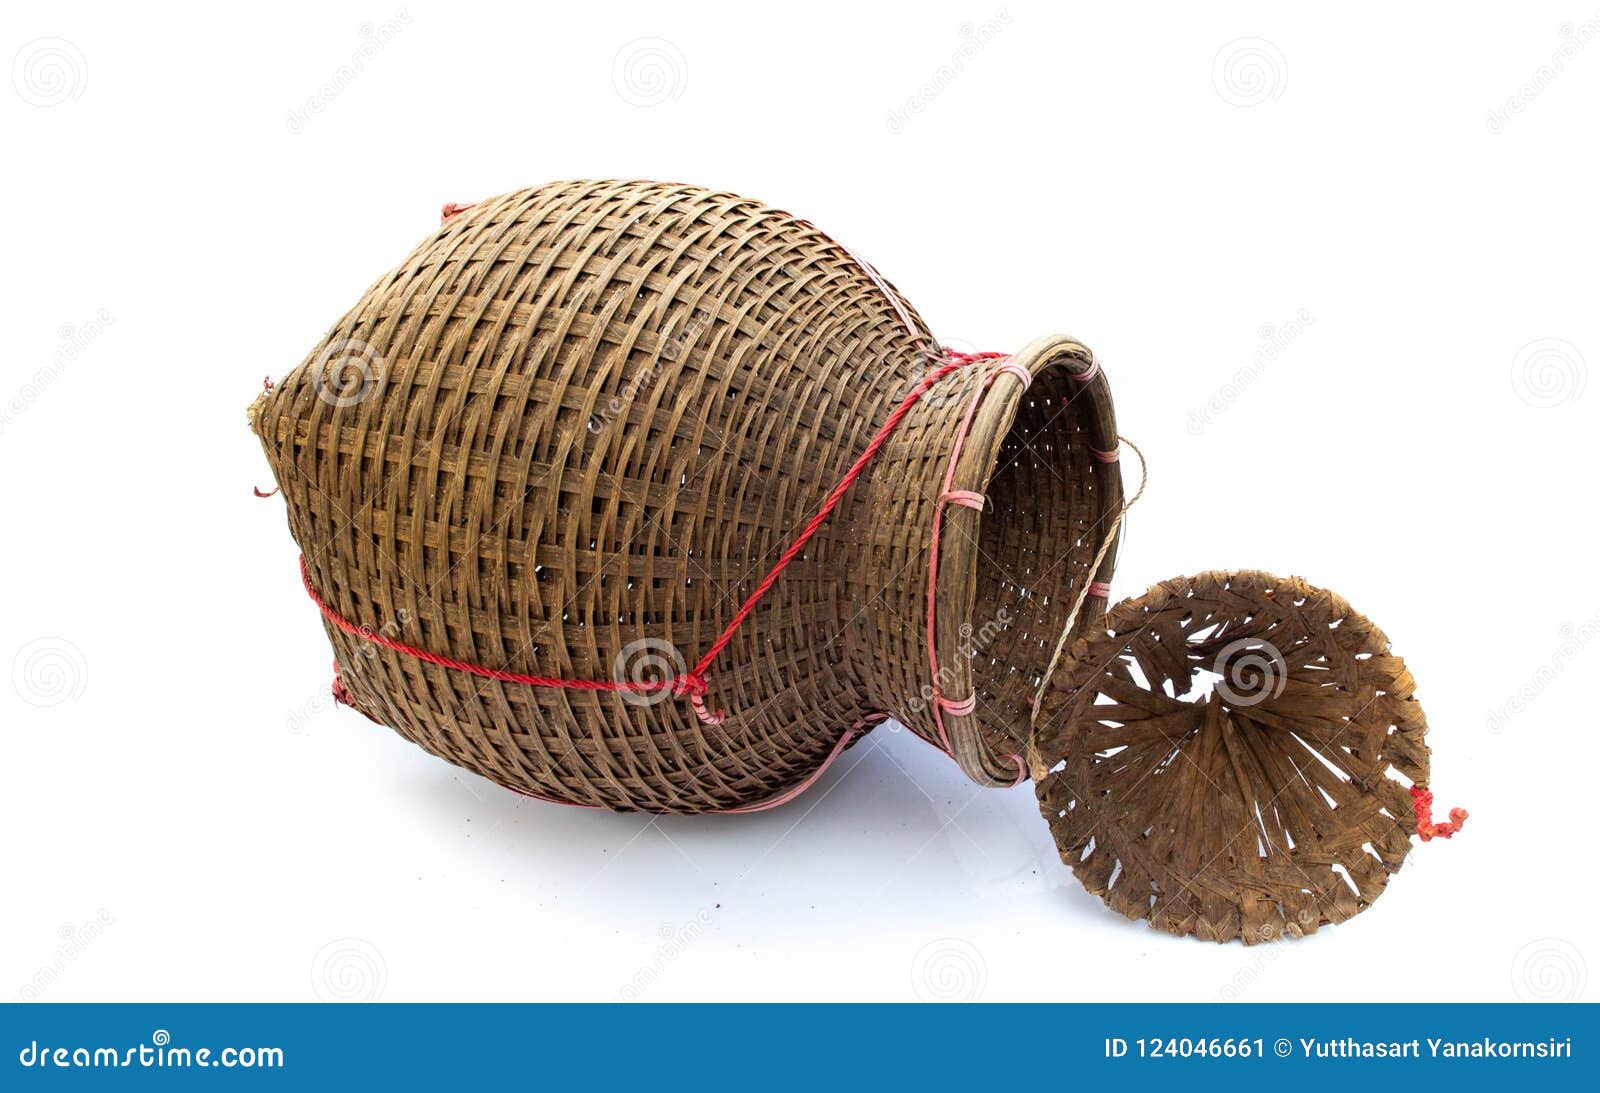 https://thumbs.dreamstime.com/z/fishing-creel-bamboo-basket-put-fish-isolated-white-background-made-thailand-fishing-creel-bamboo-basket-put-fish-124046661.jpg